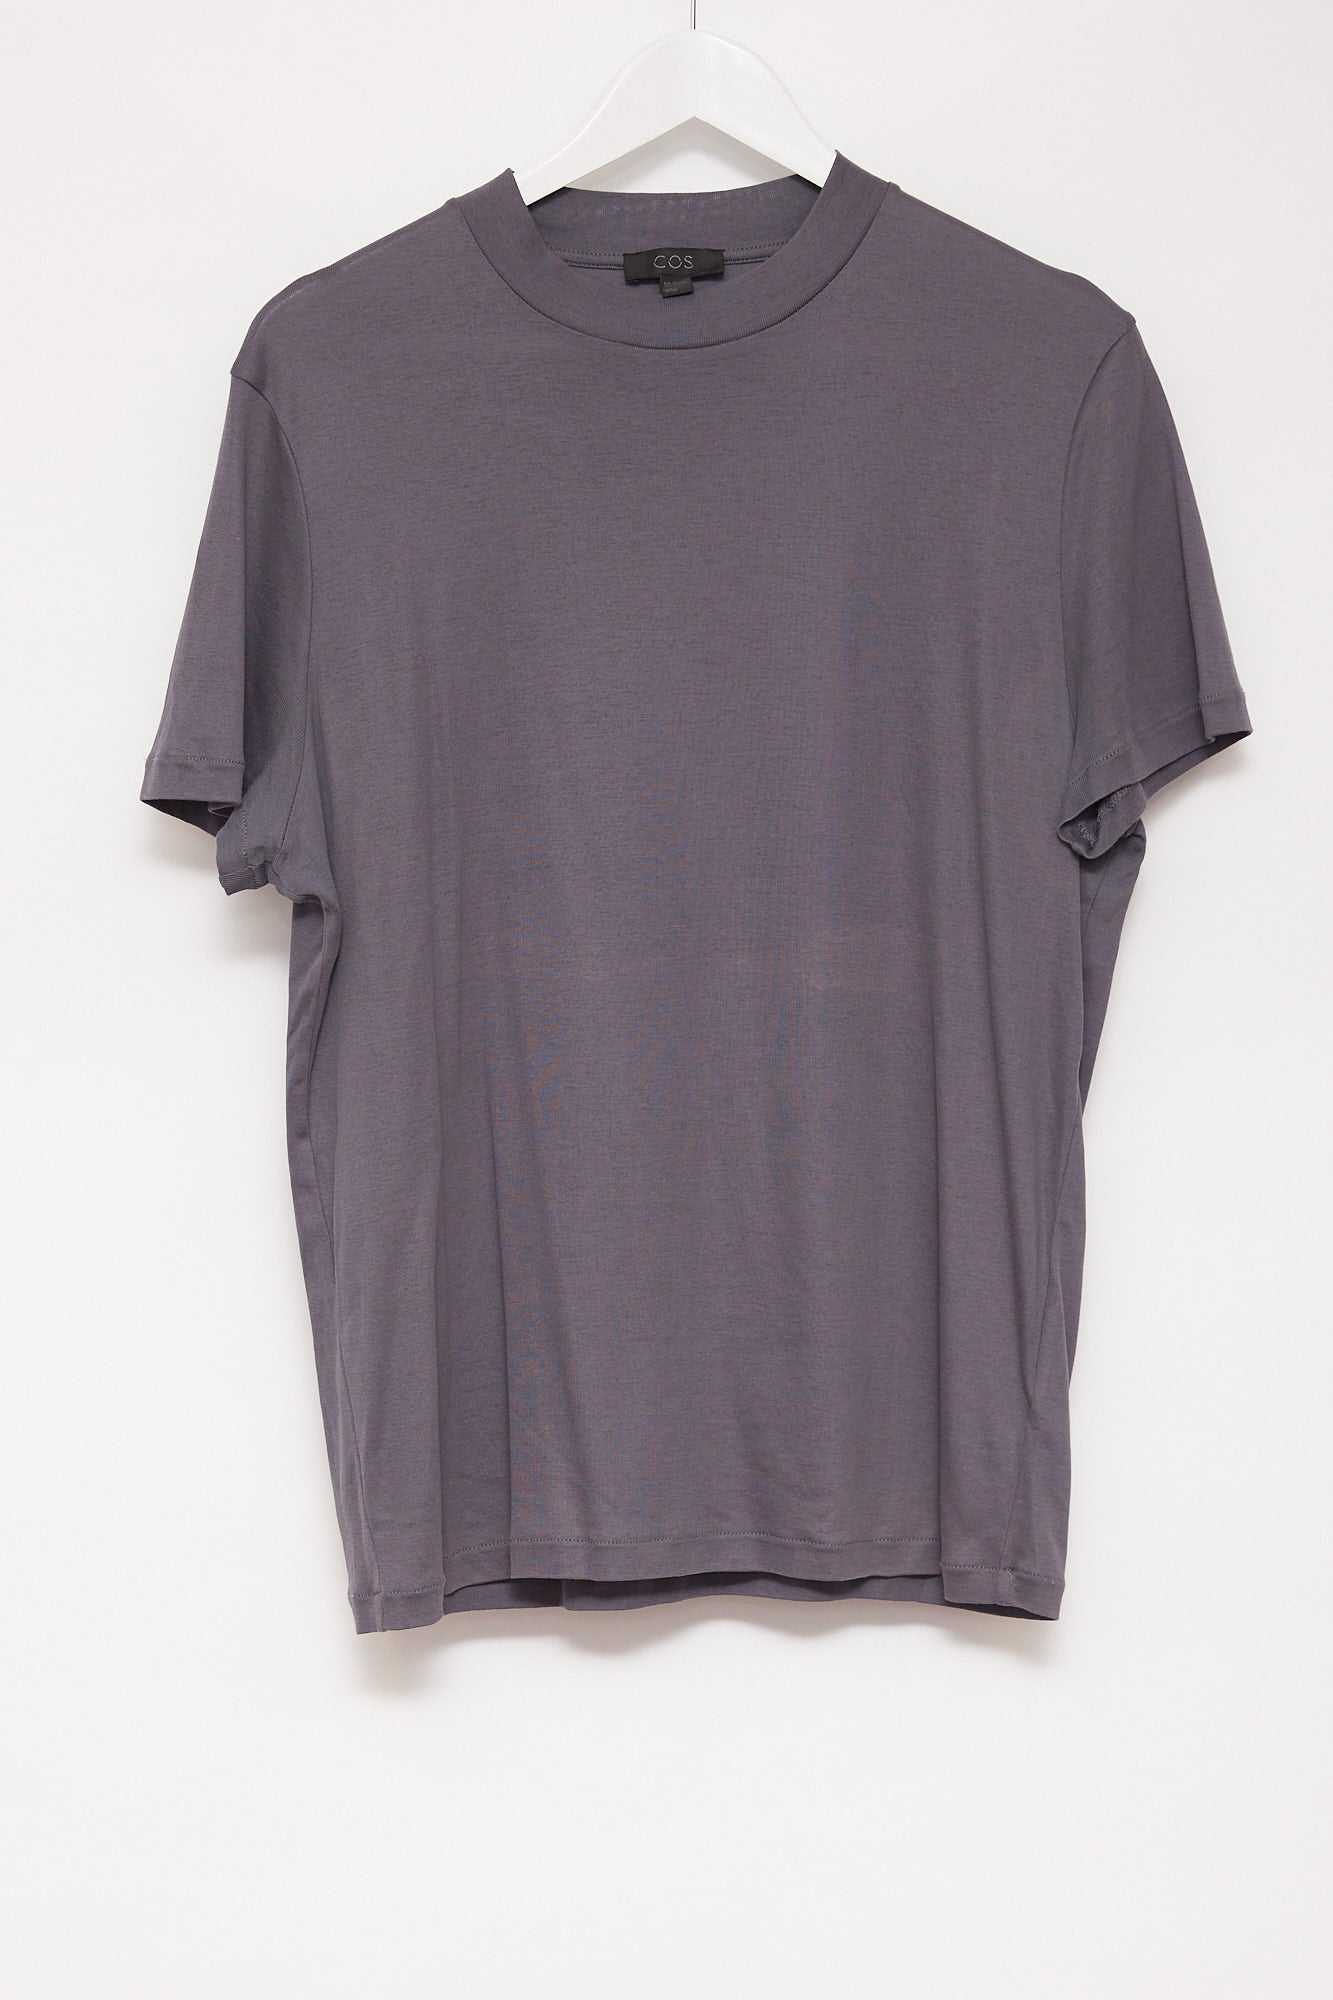 Mens Cos Relaxed Fit Grey T-shirt size Medium